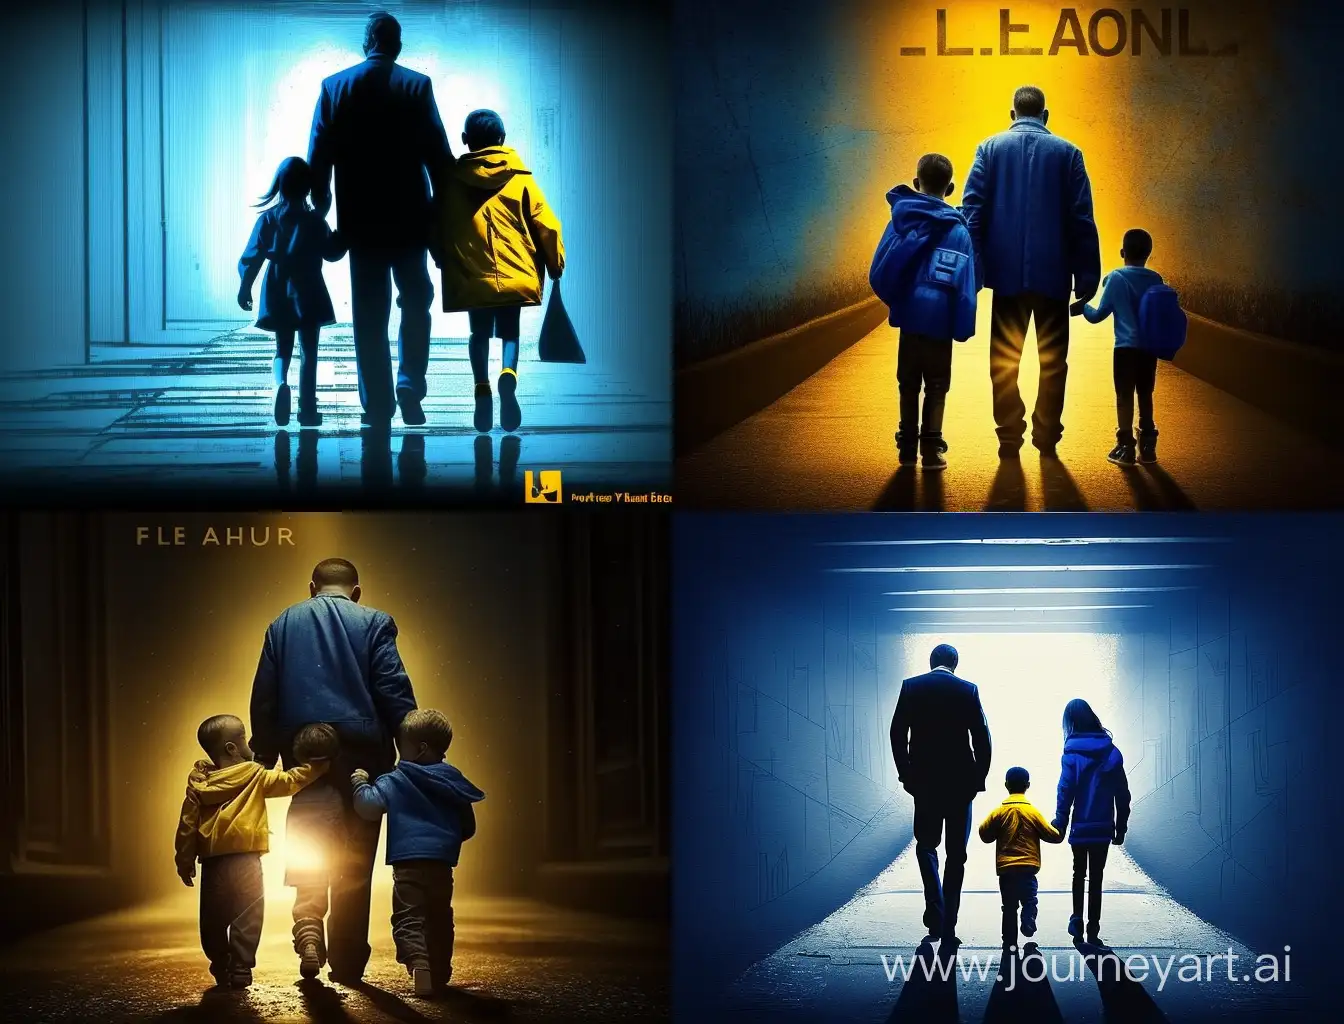 Successful-Father-Guides-Children-on-the-Path-to-Financial-Hope-with-Blue-and-Yellow-Illumination